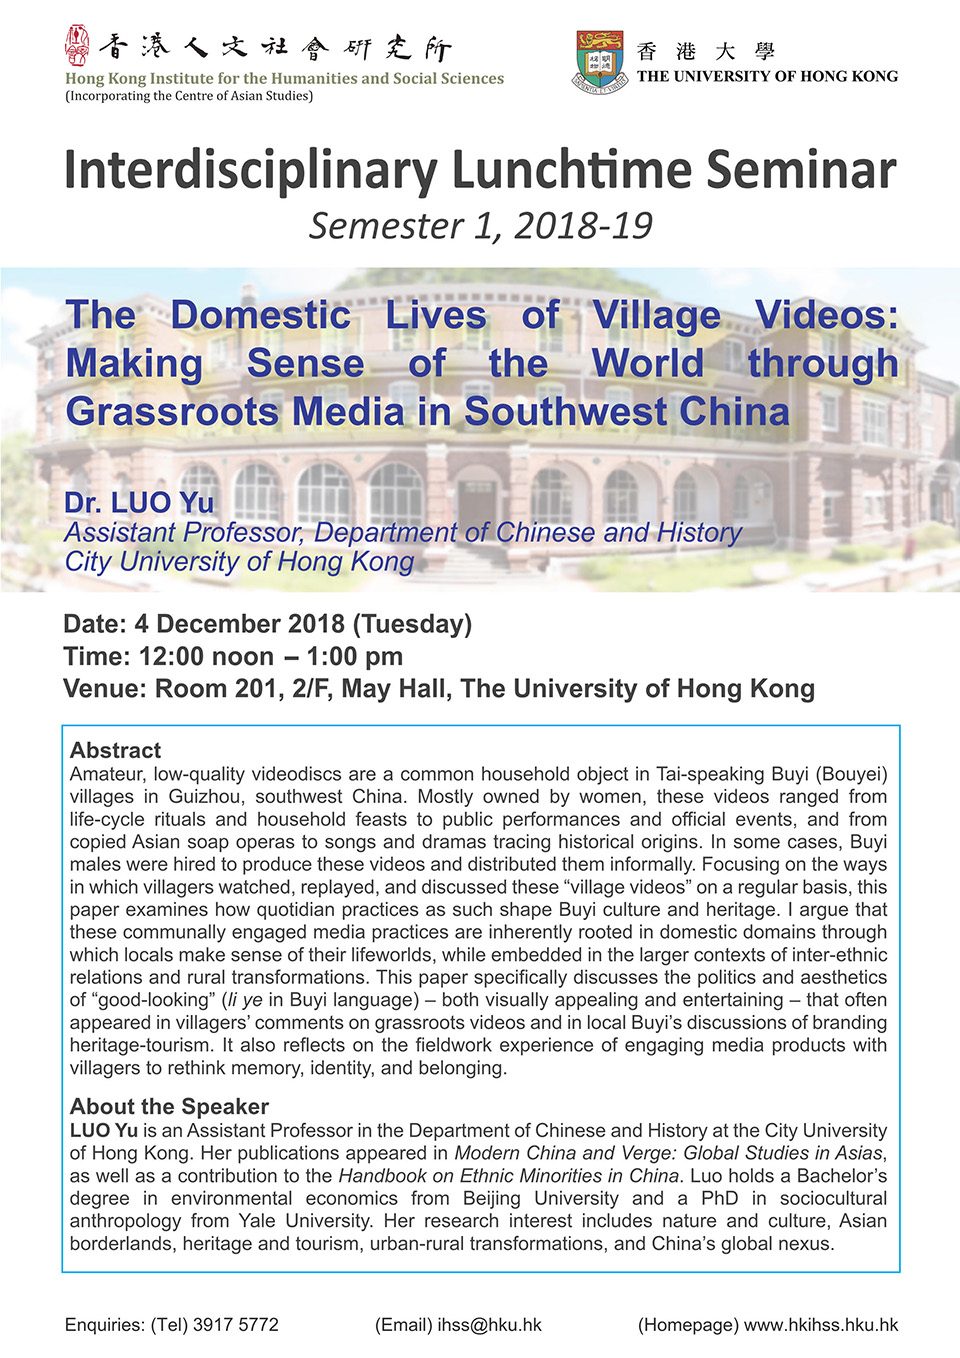 An Interdisciplinary Lunchtime Seminar on “The Domestic Lives of Village Videos: Making Sense of the World through Grassroots Media in Southwest China” by Dr. Chen Fong Fong (December 4, 2018)